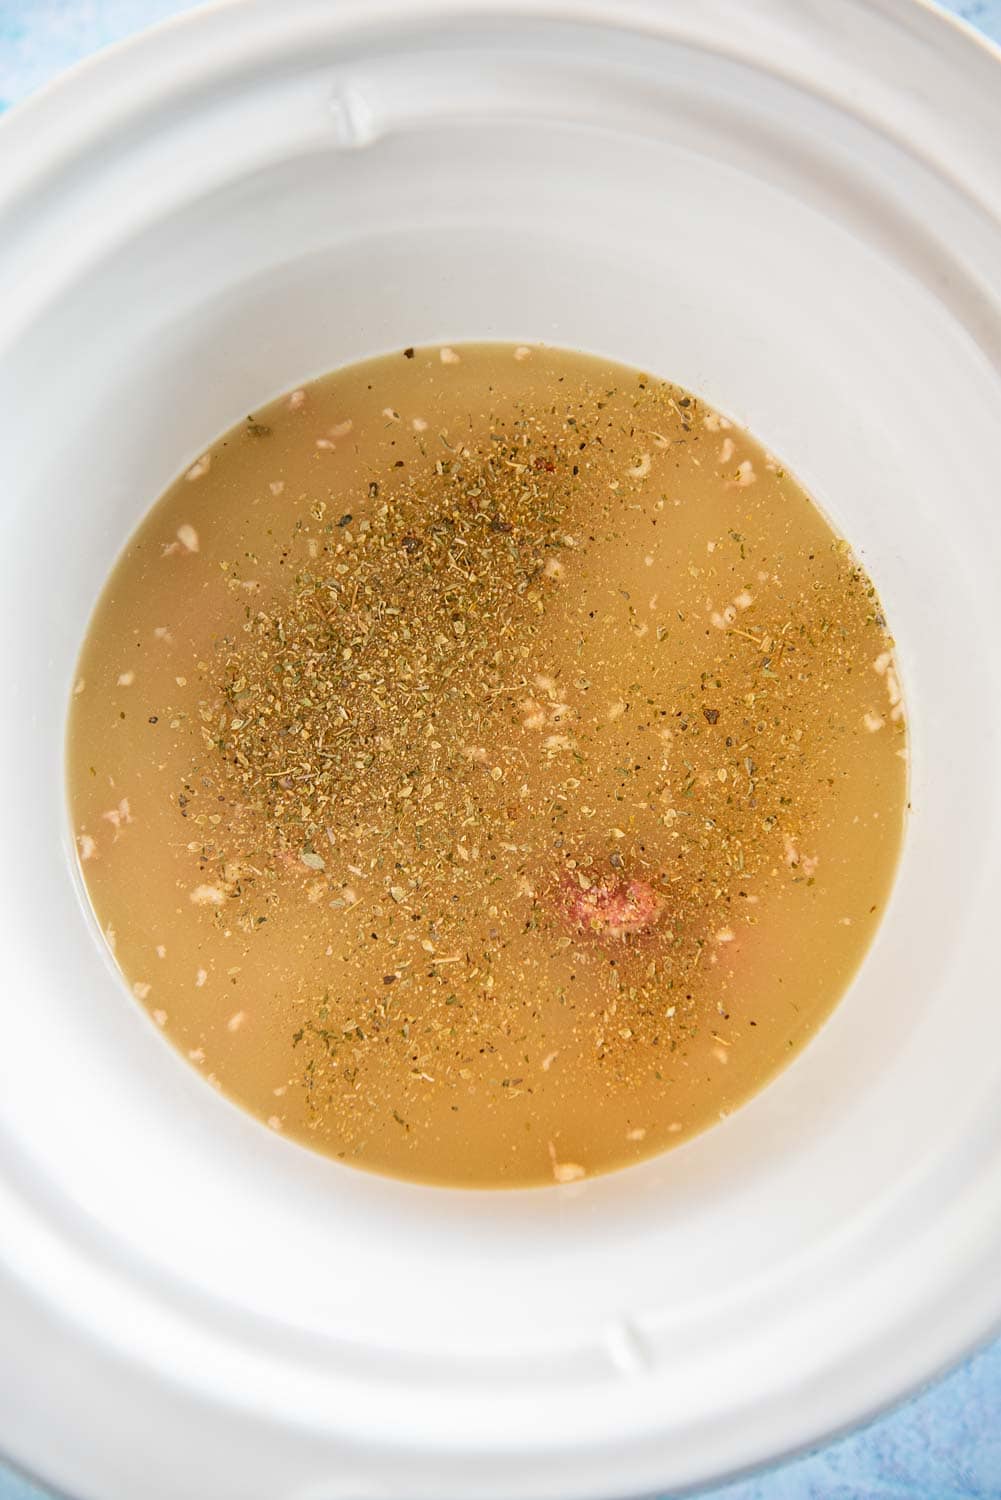 Seasonings and broth all inside a slow cooker bowl